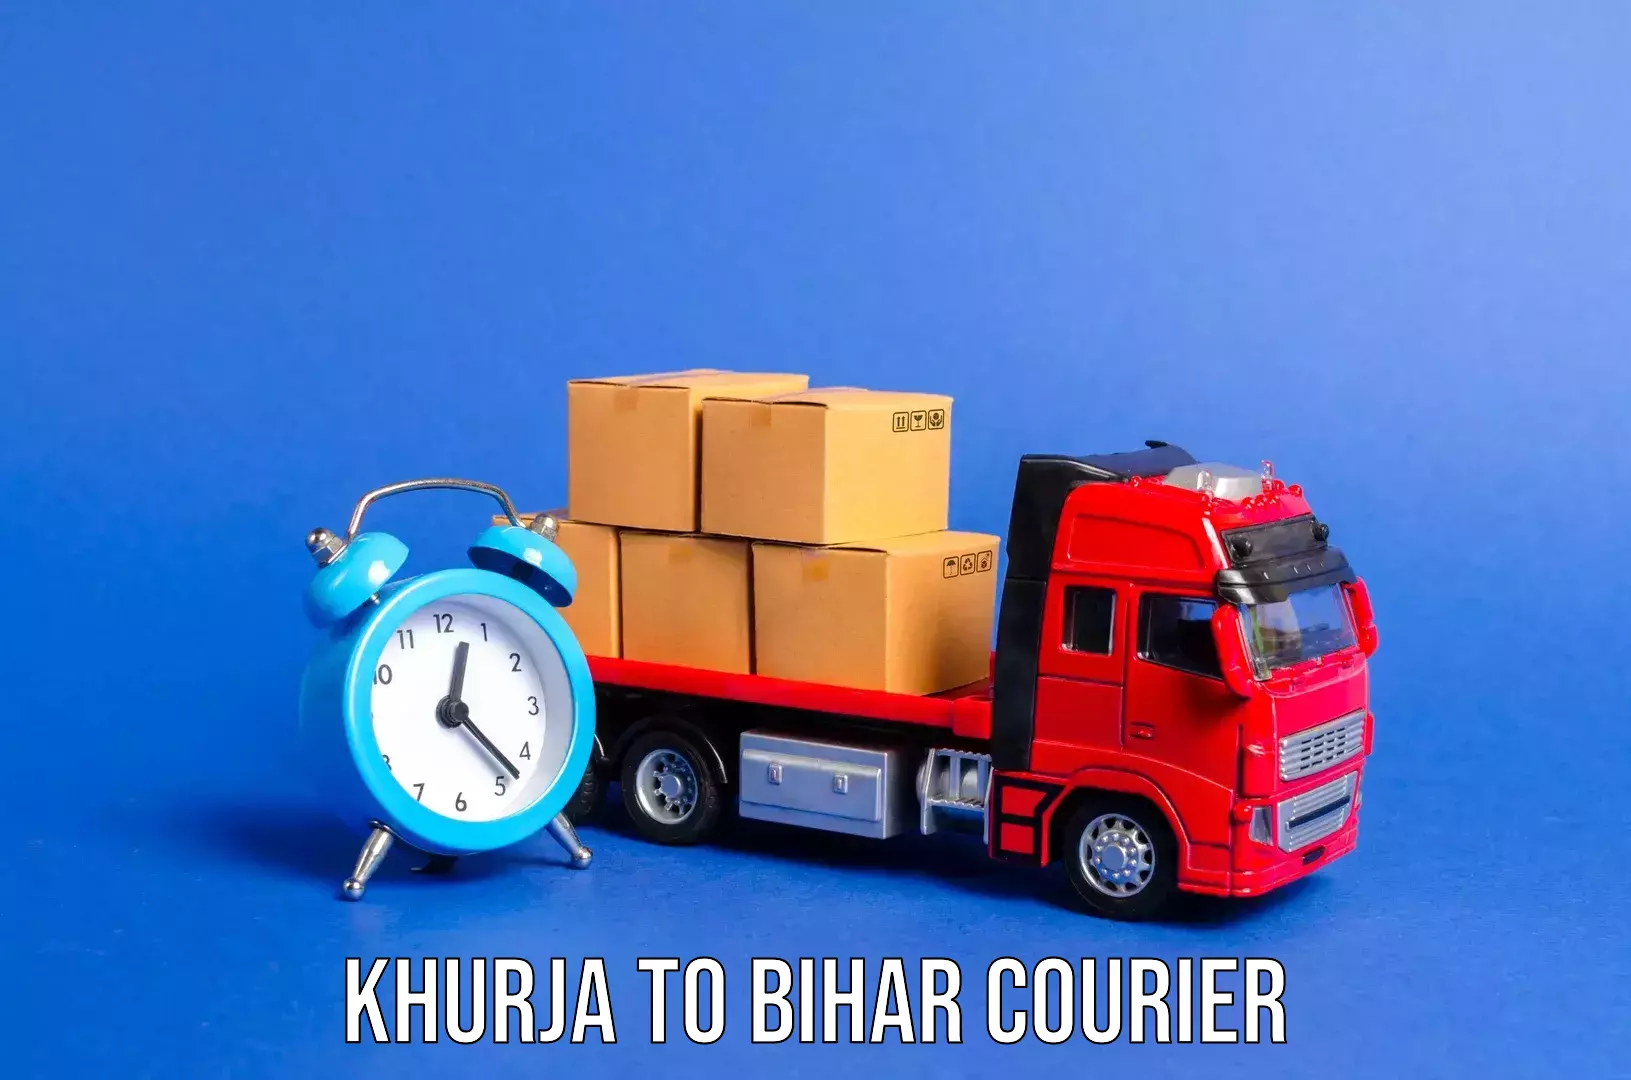 Luggage shipment specialists Khurja to Fatwah